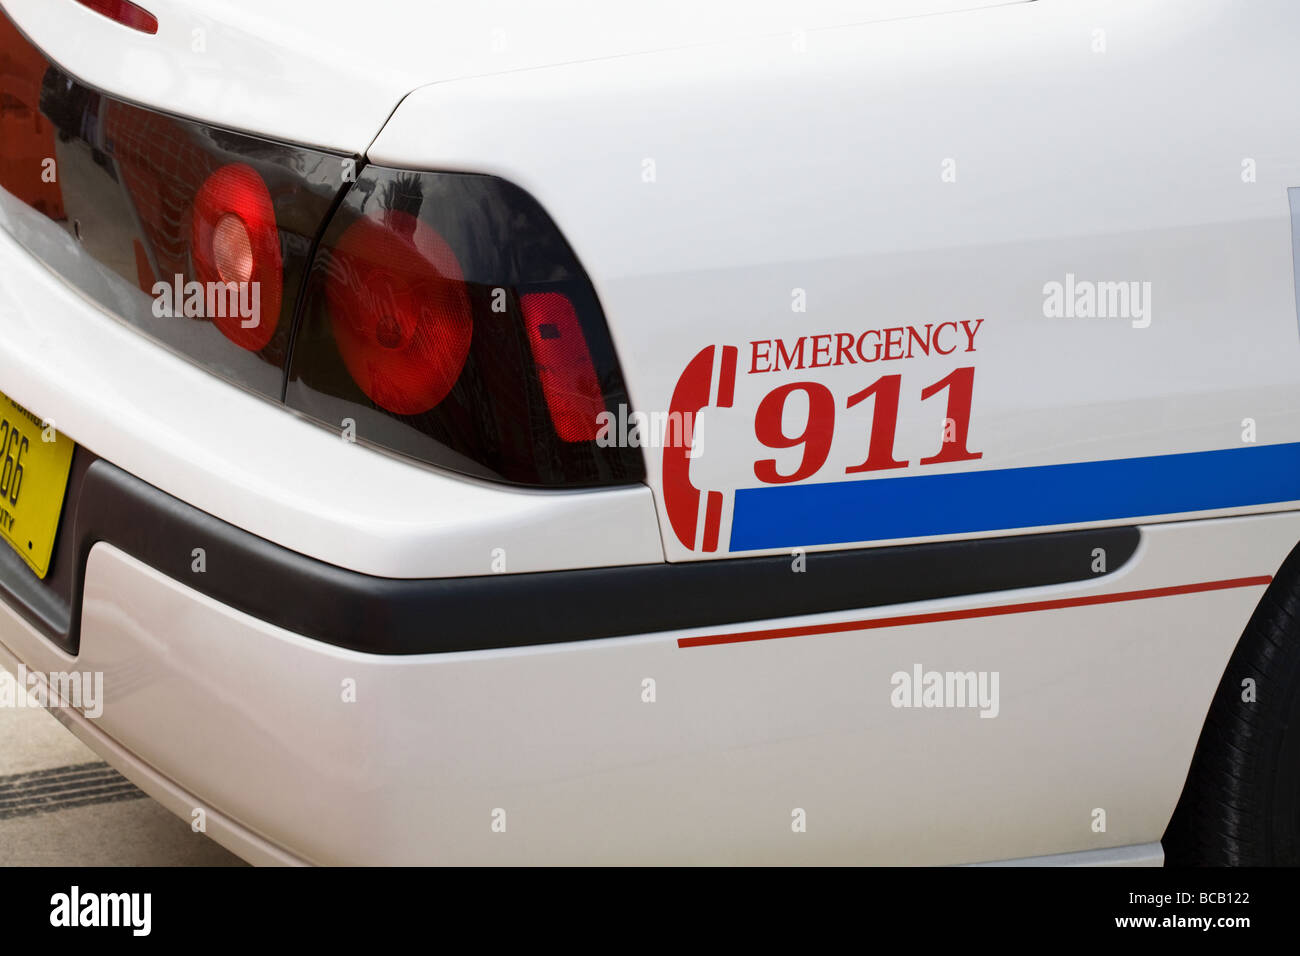 'Emergency 911' on the side of a police car Stock Photo